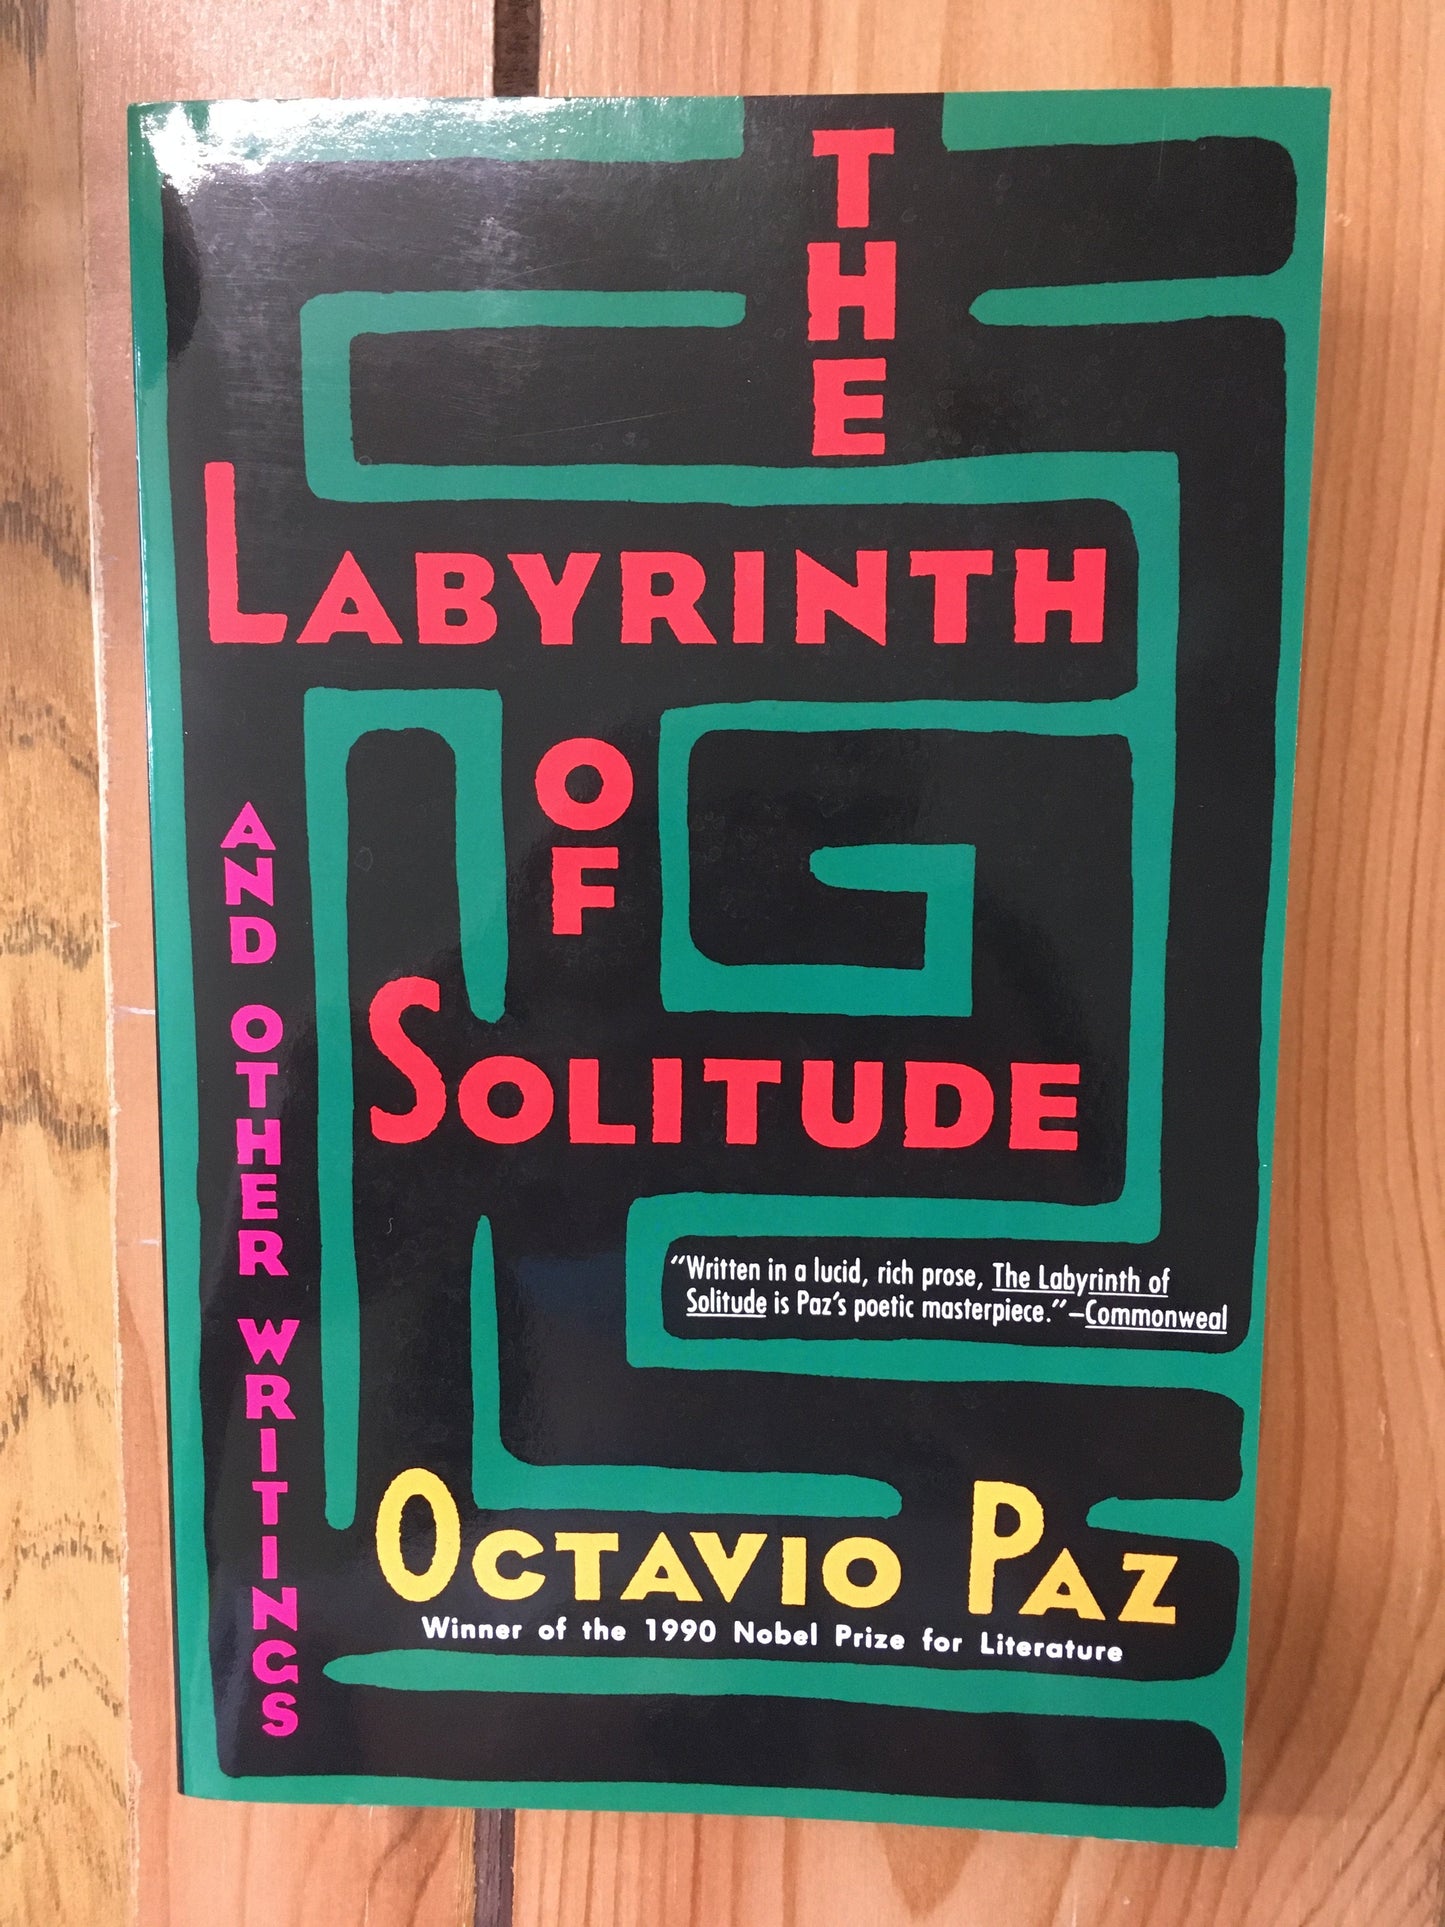 The Labyrinth of Solitude and Other Writings